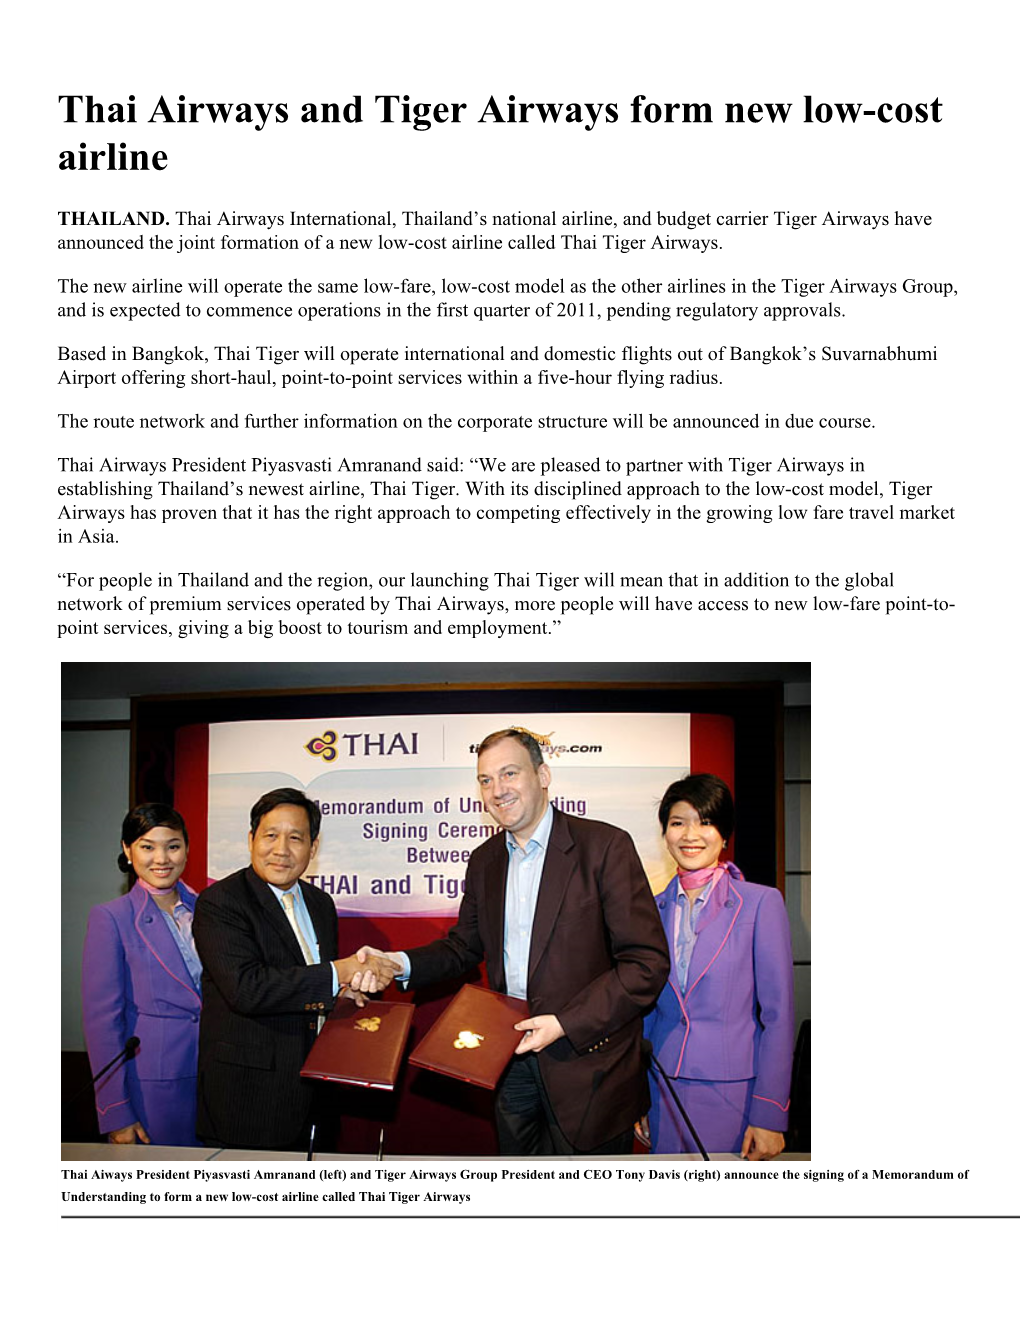 Thai Airways and Tiger Airways Form New Low-Cost Airline